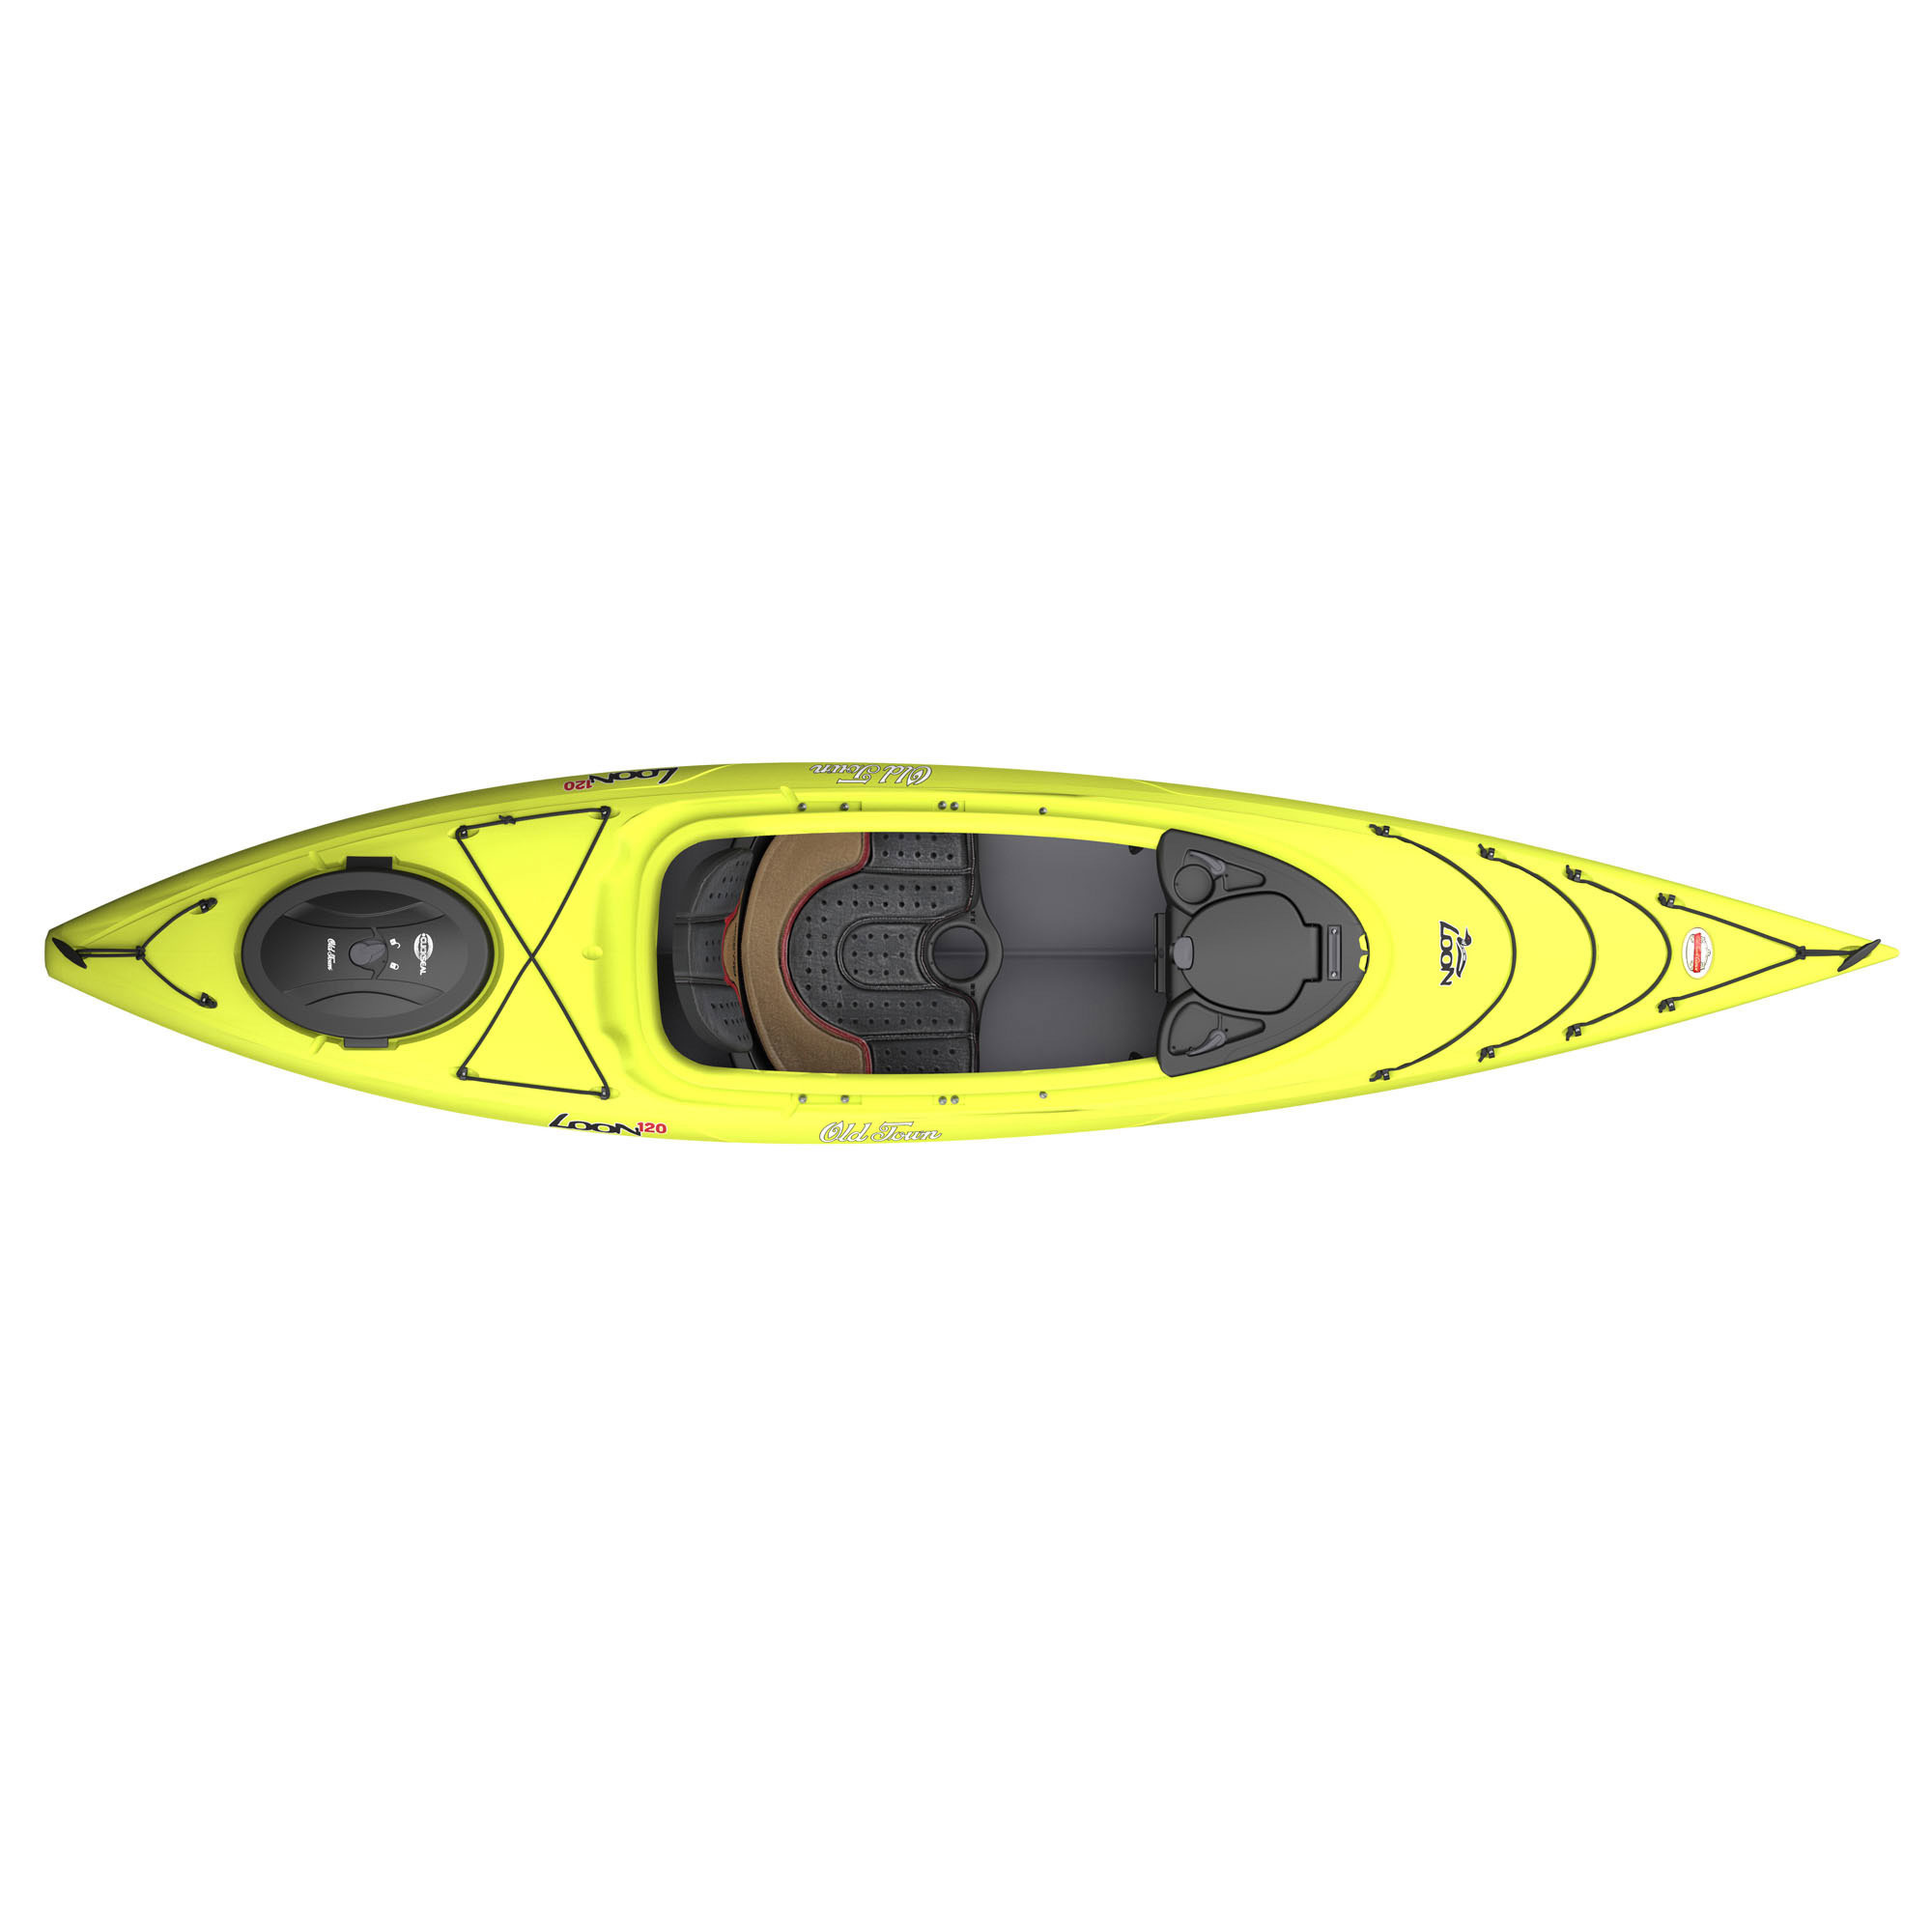 Old Town Kayaks Loon 120 S/M